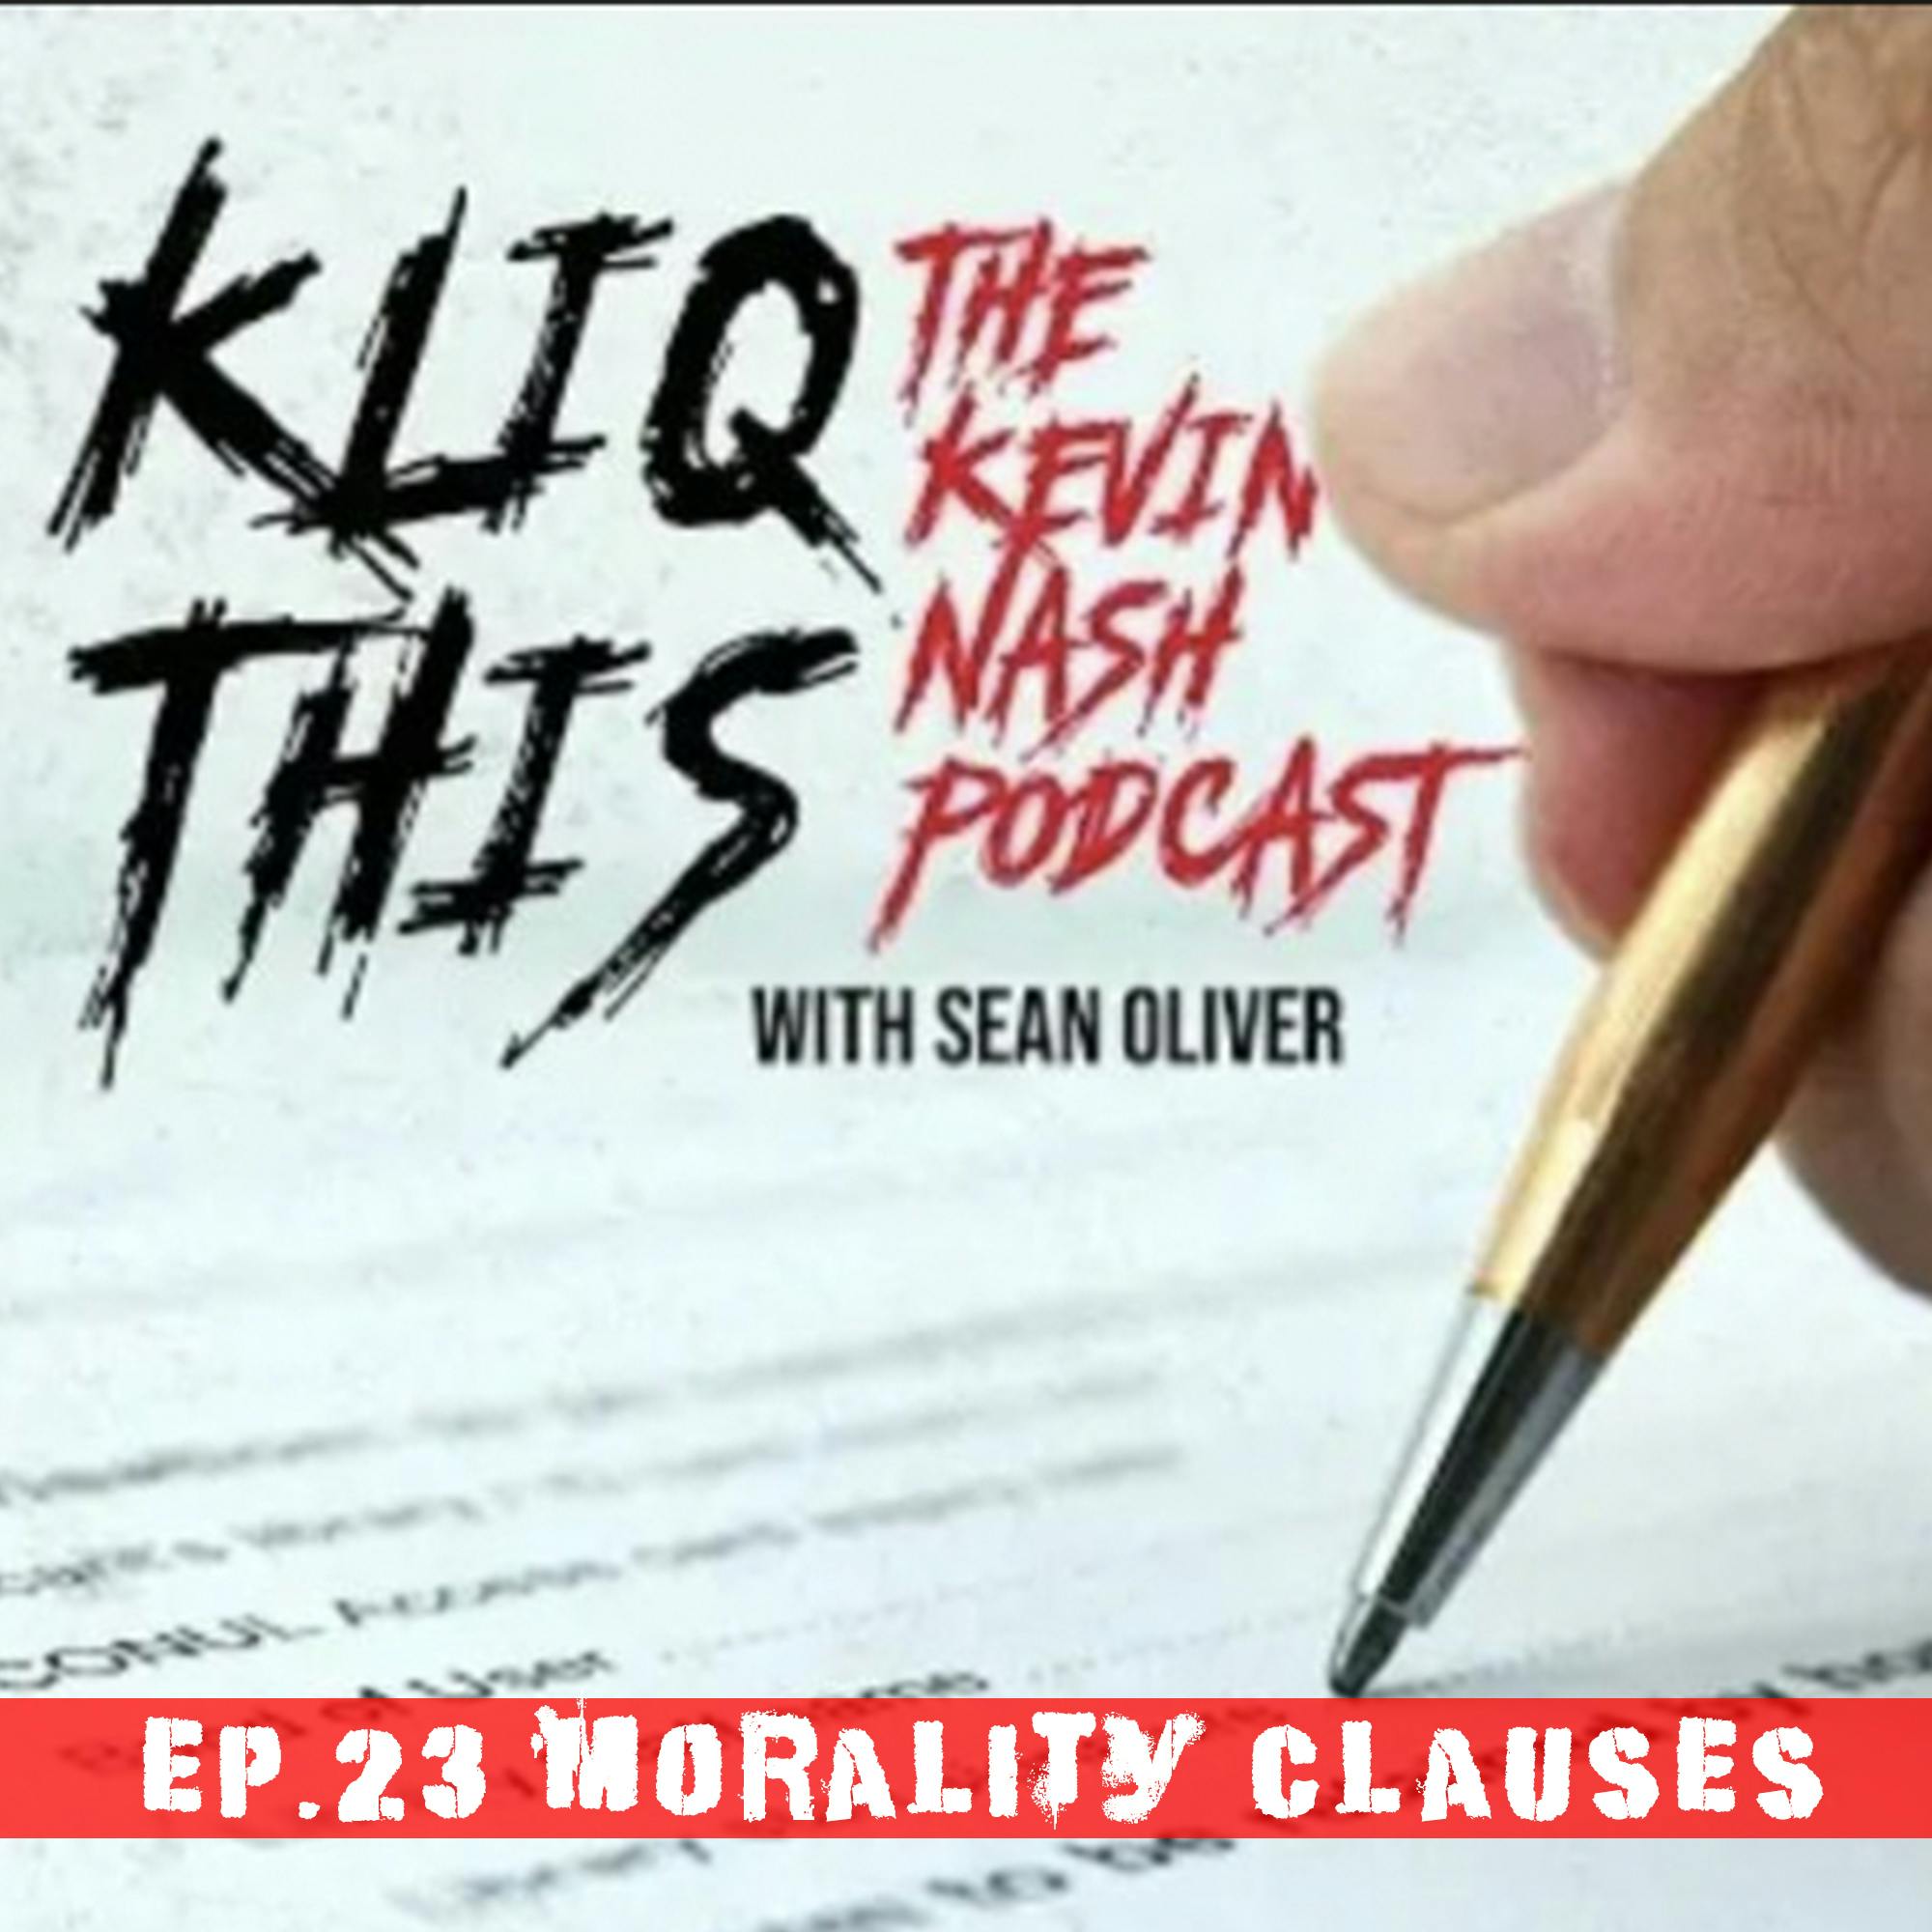 Athletes & Morality Clauses